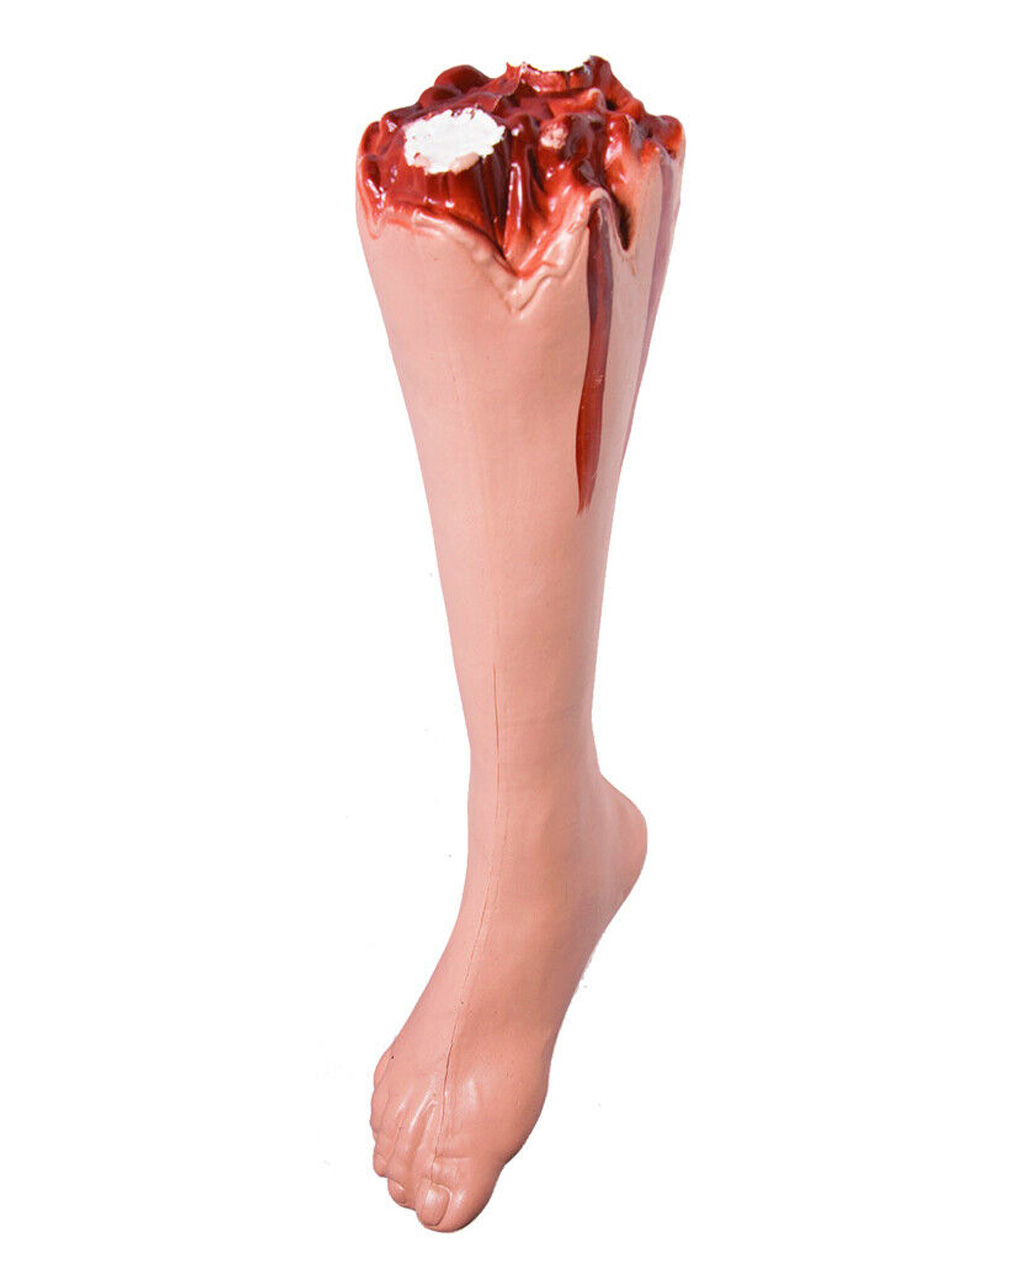 Realistic Life Size Bloody GORY SEVERED LEG FOOT Body Part Halloween Horror Prop 